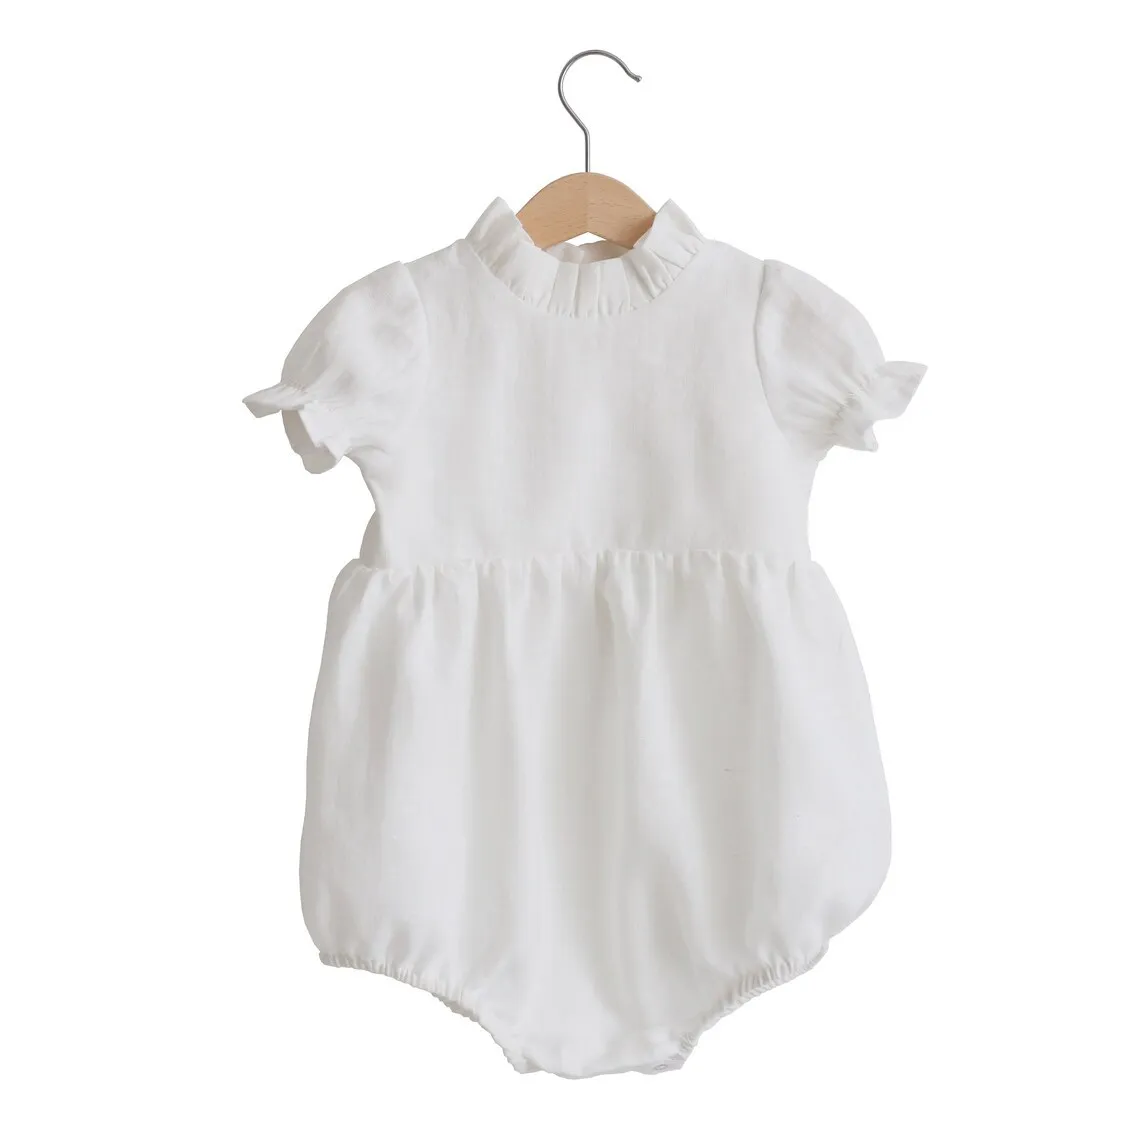 

Wholesale good quality china clothes soft summer plain cotton baby clothes sets newborn baby rompers, More colors/customs color